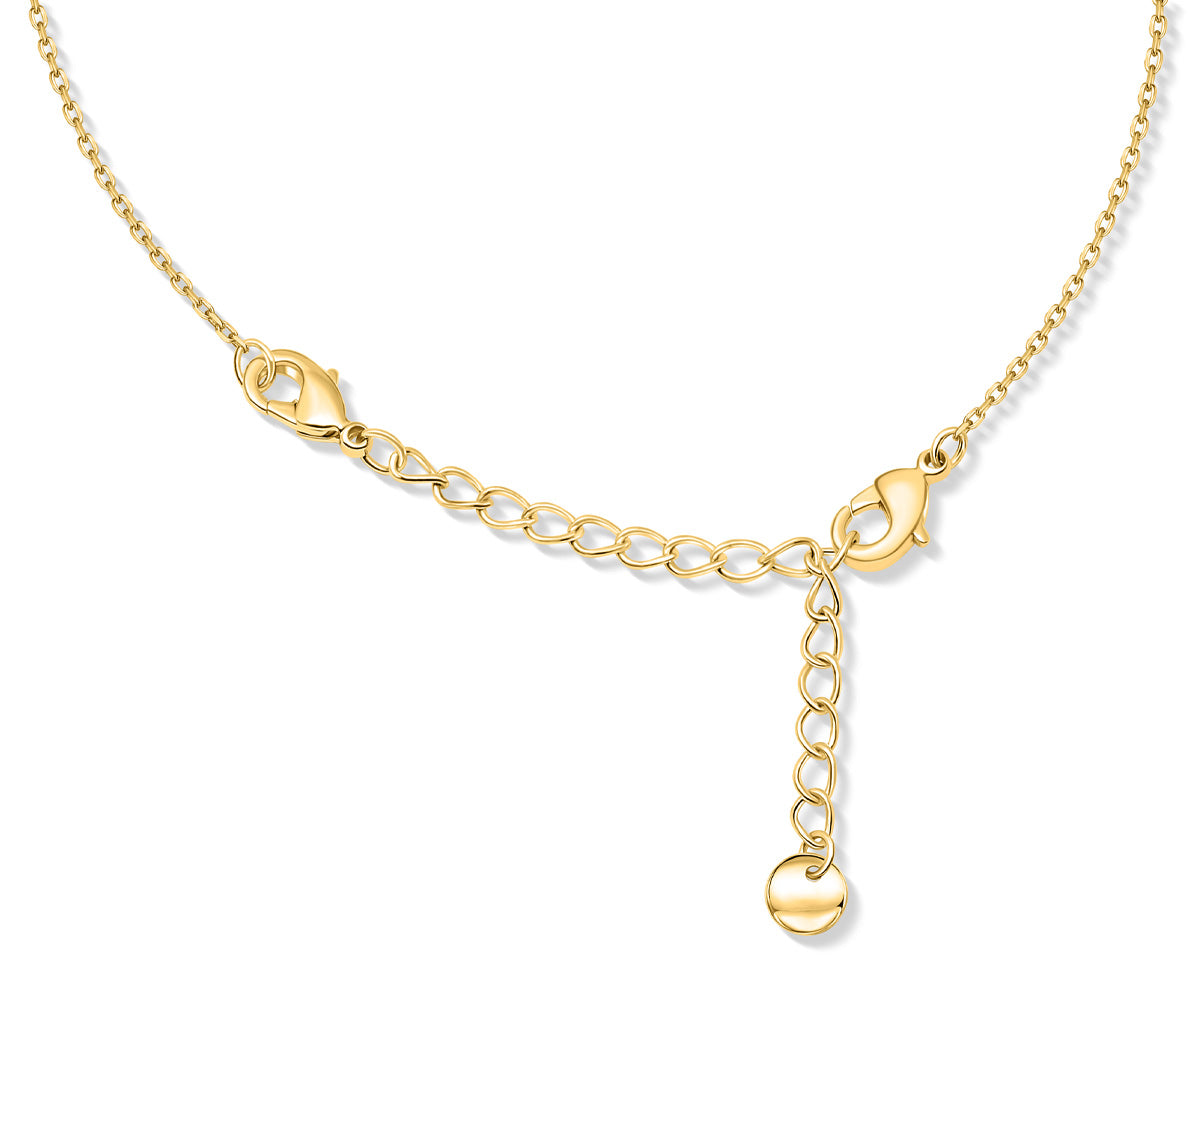 Gold plated necklace extender